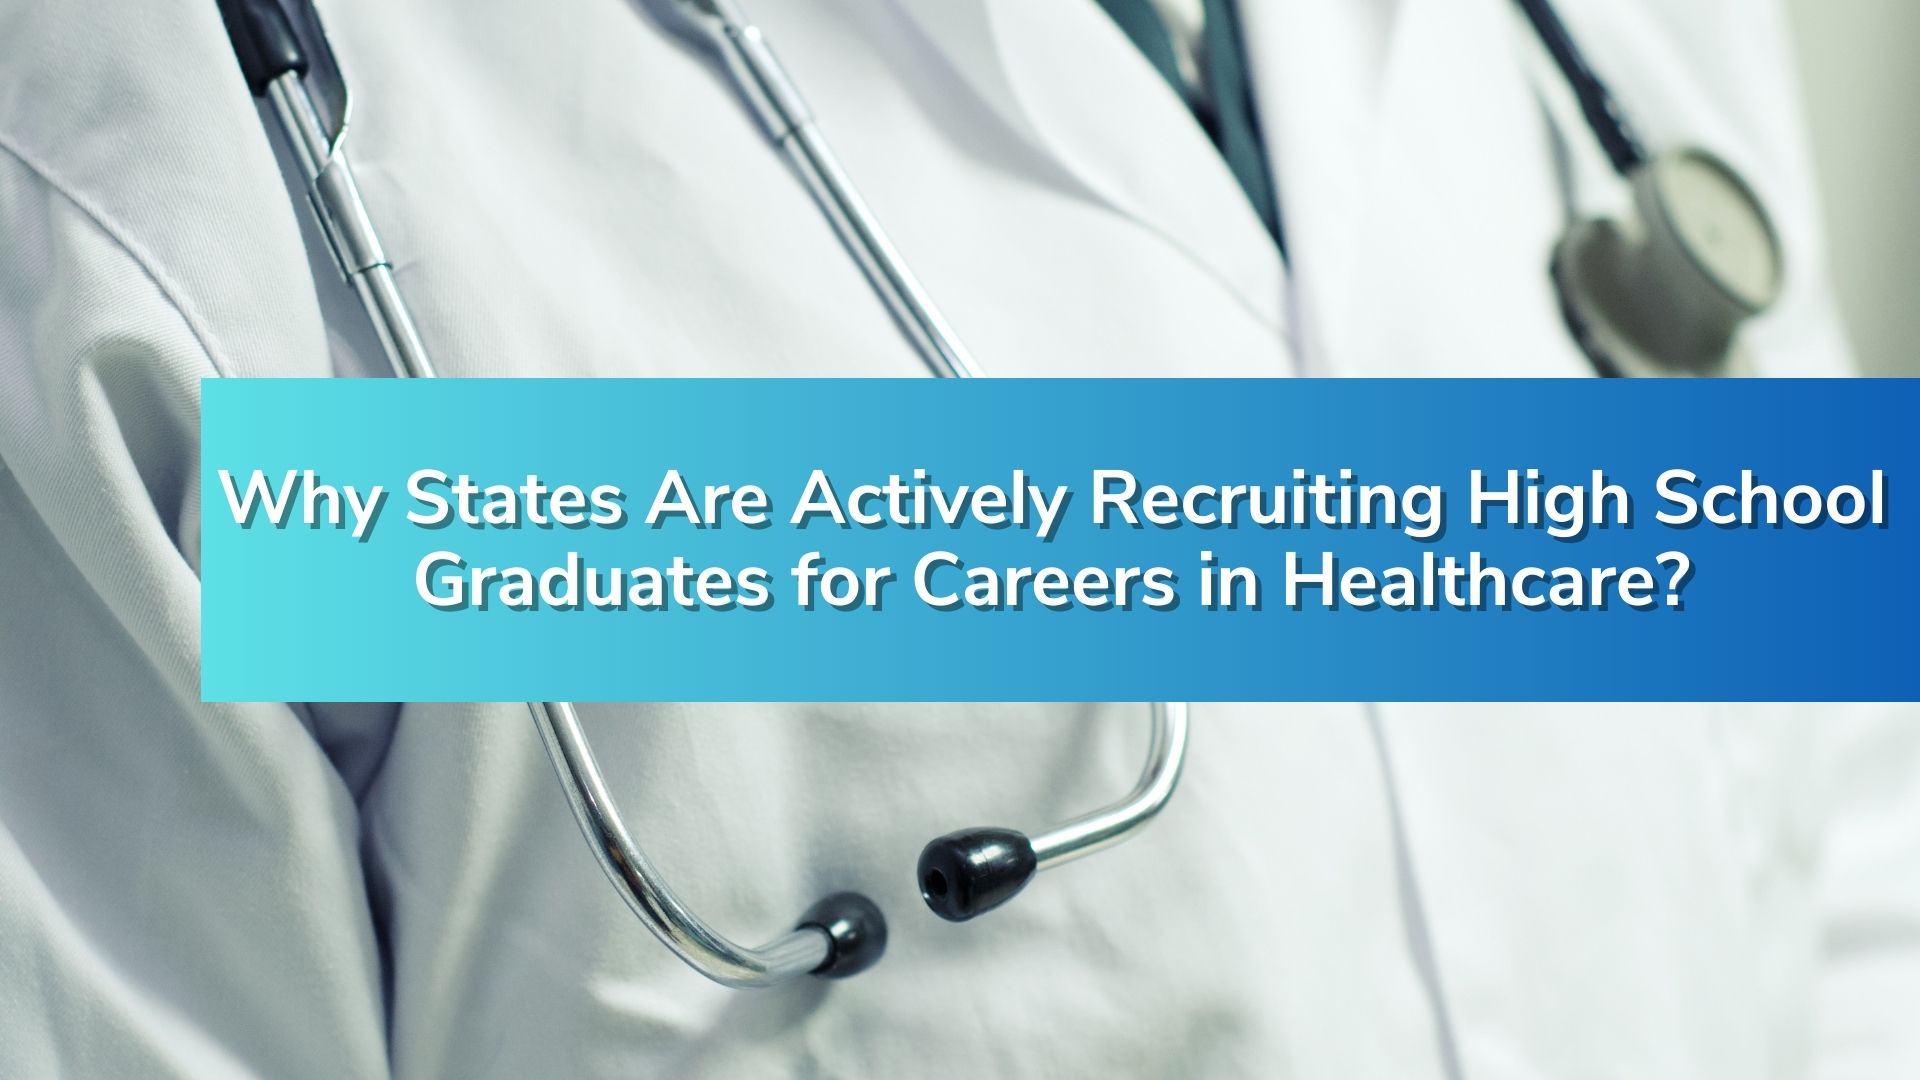 Why States Are Actively Recruiting High School Graduates for Careers in Healthcare?